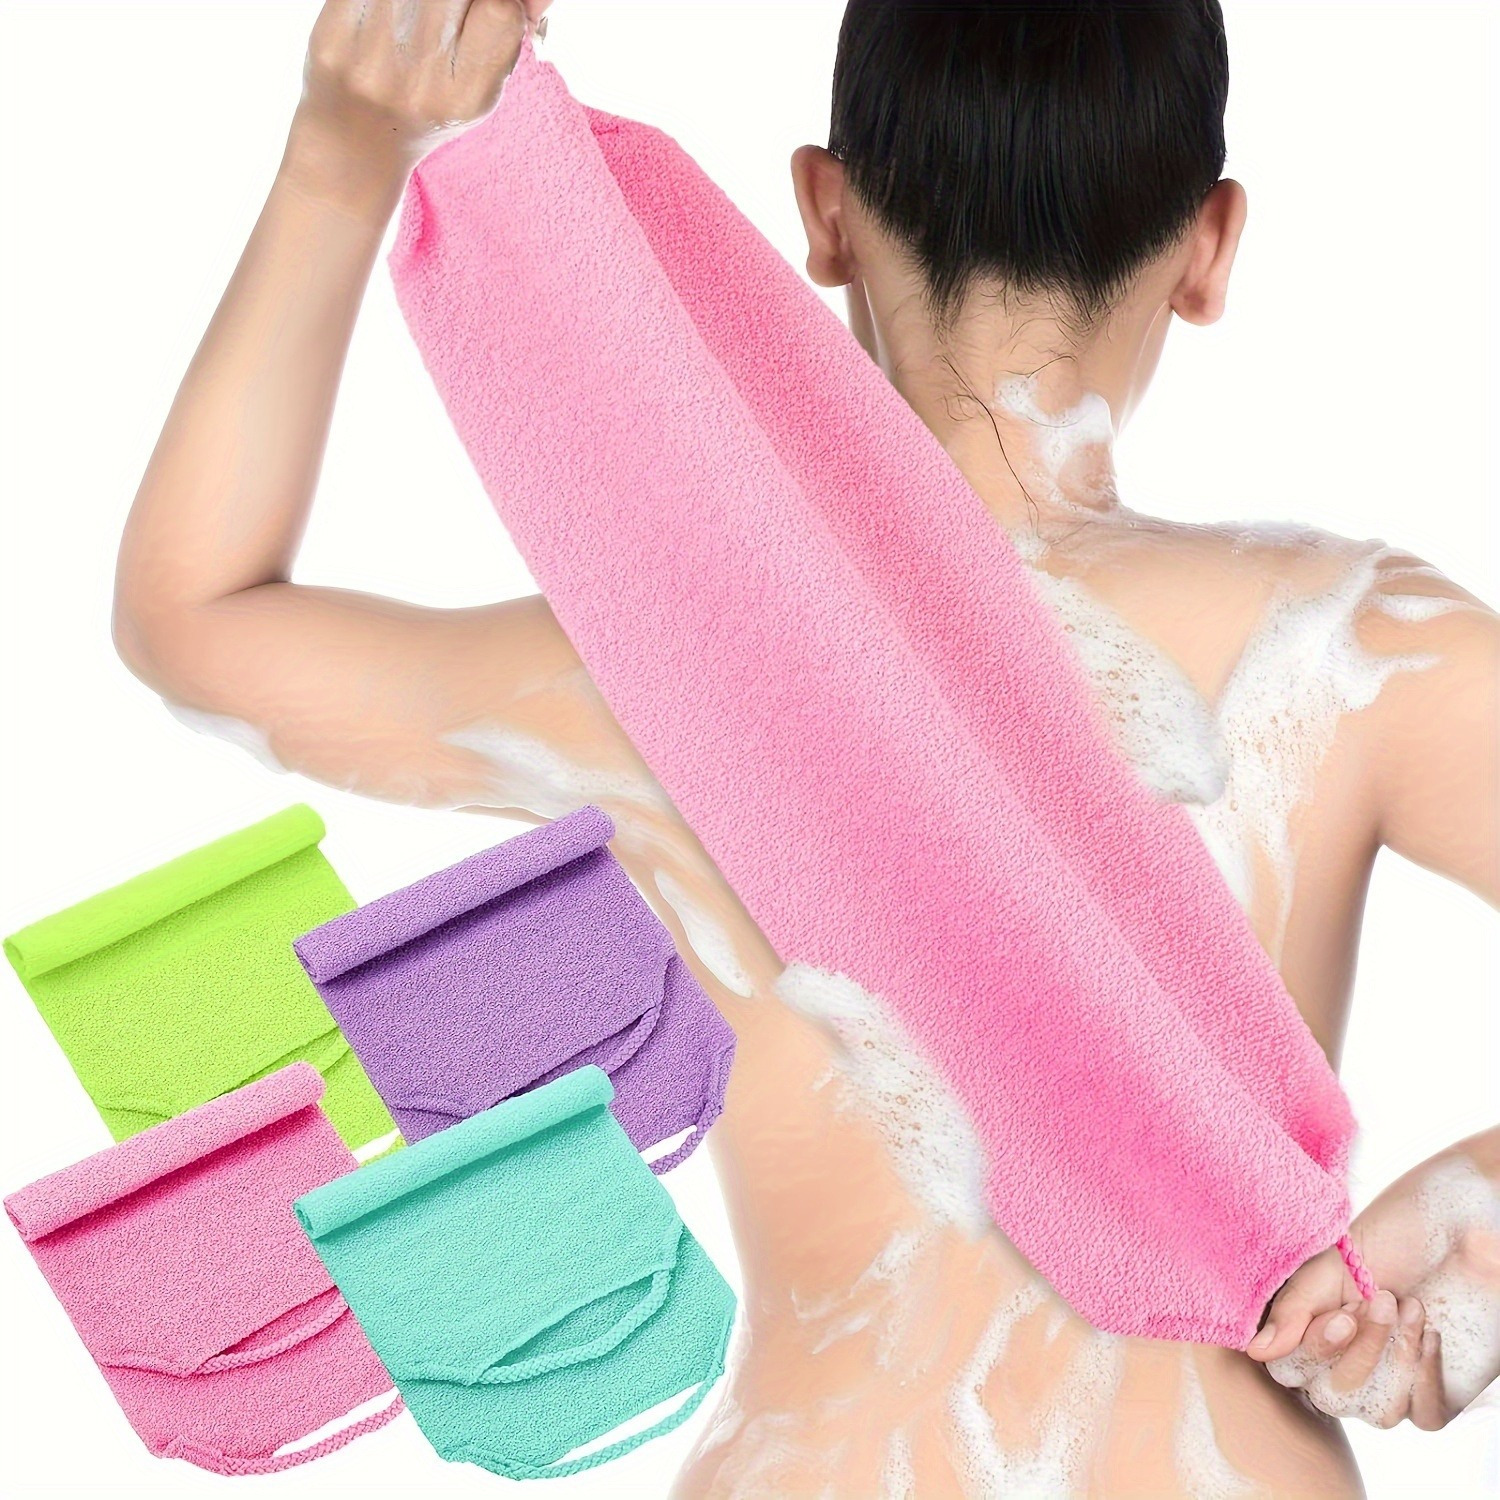 

4-piece Stretchable Nylon Exfoliating Back Scrubber Gloves - Dual-layer, Quick Dry Body Scrub Cloth With Handle For Shower, Skin Cleansing & Massage - Unisex